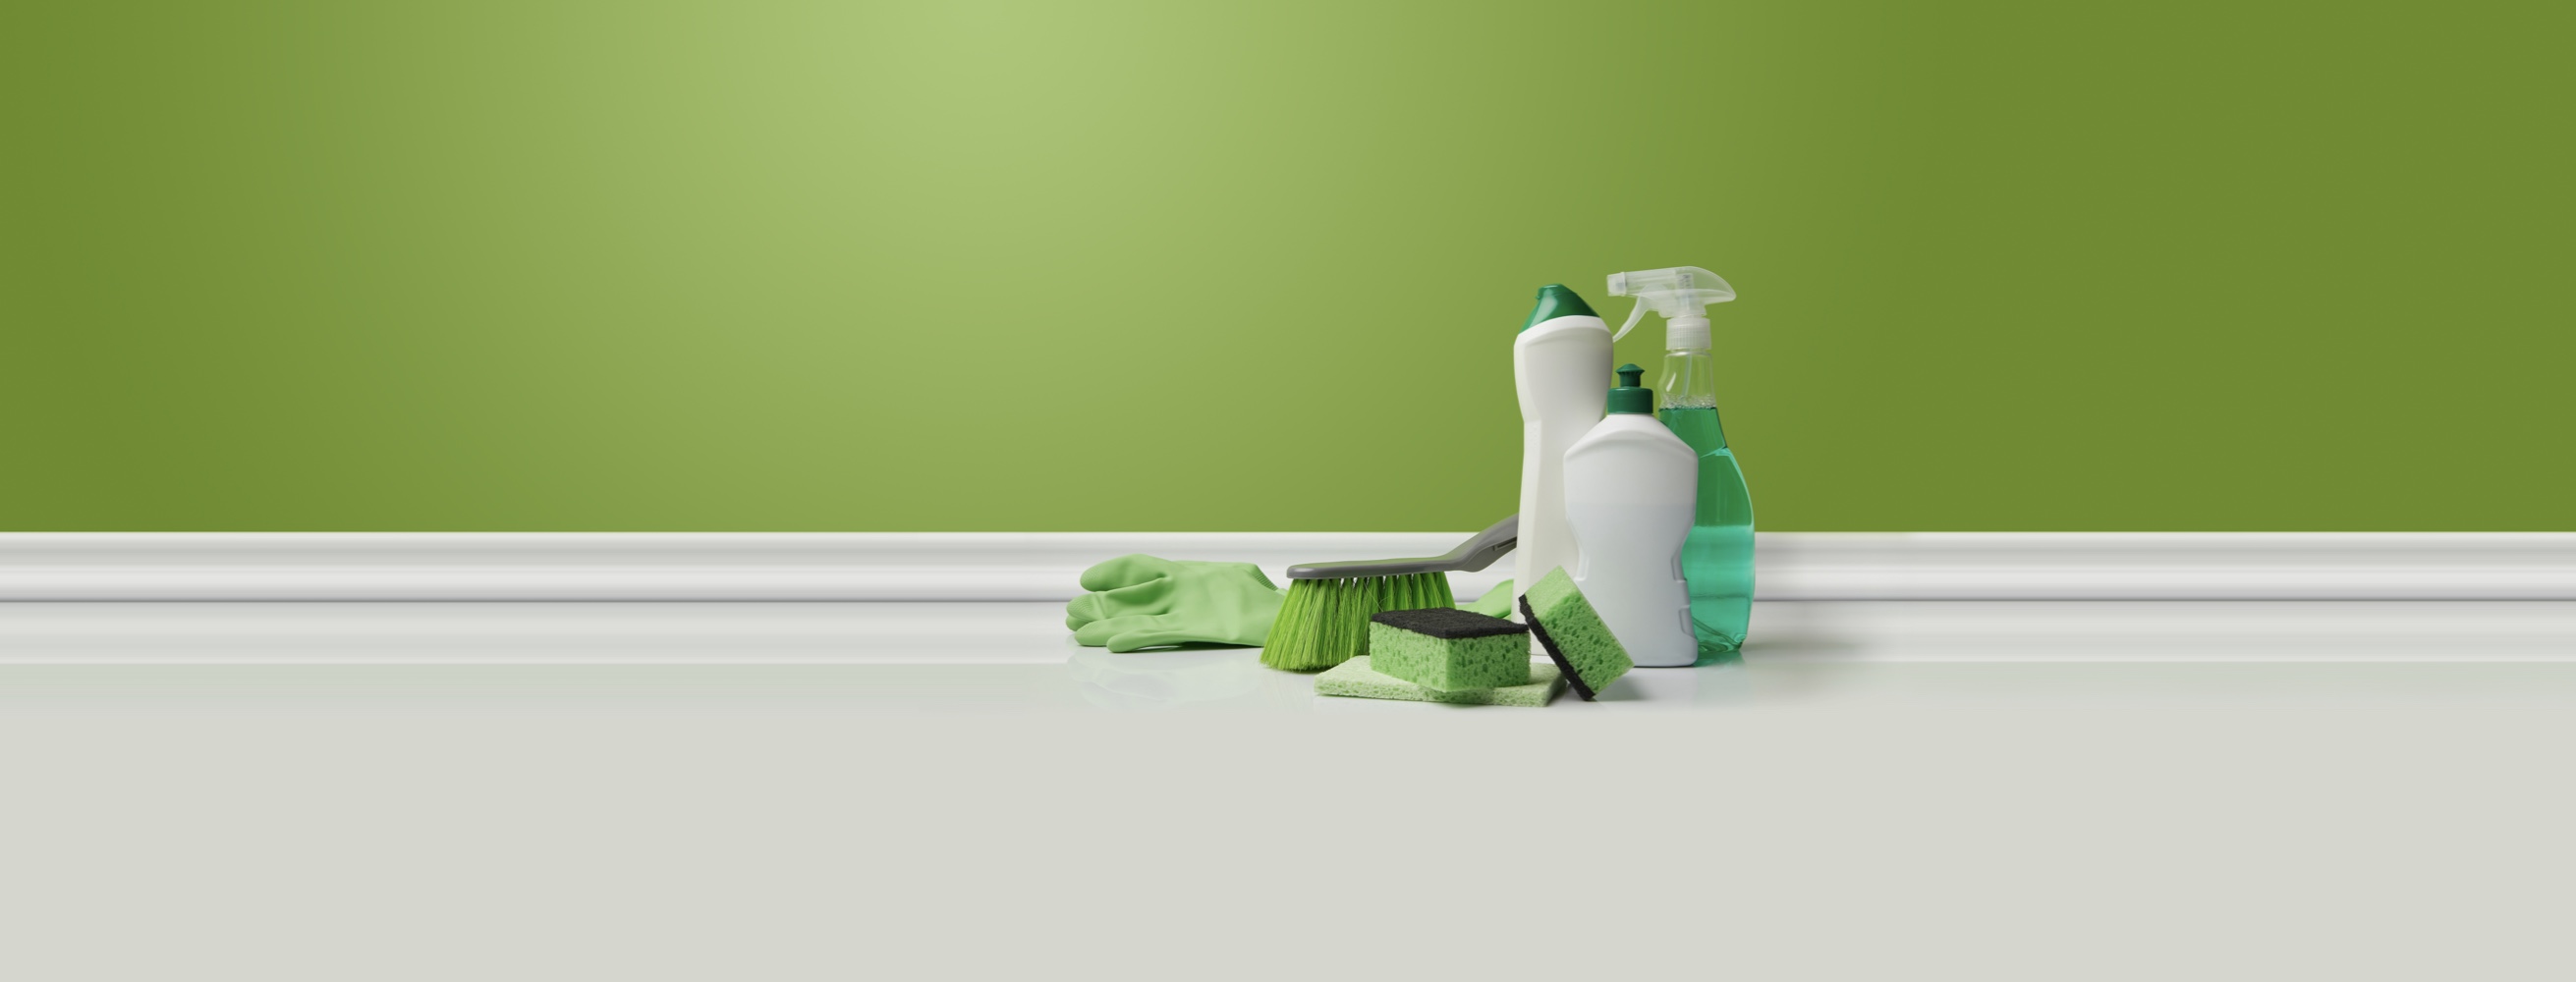 Green-colored cleaning supplies on a white floor next to a green wall.